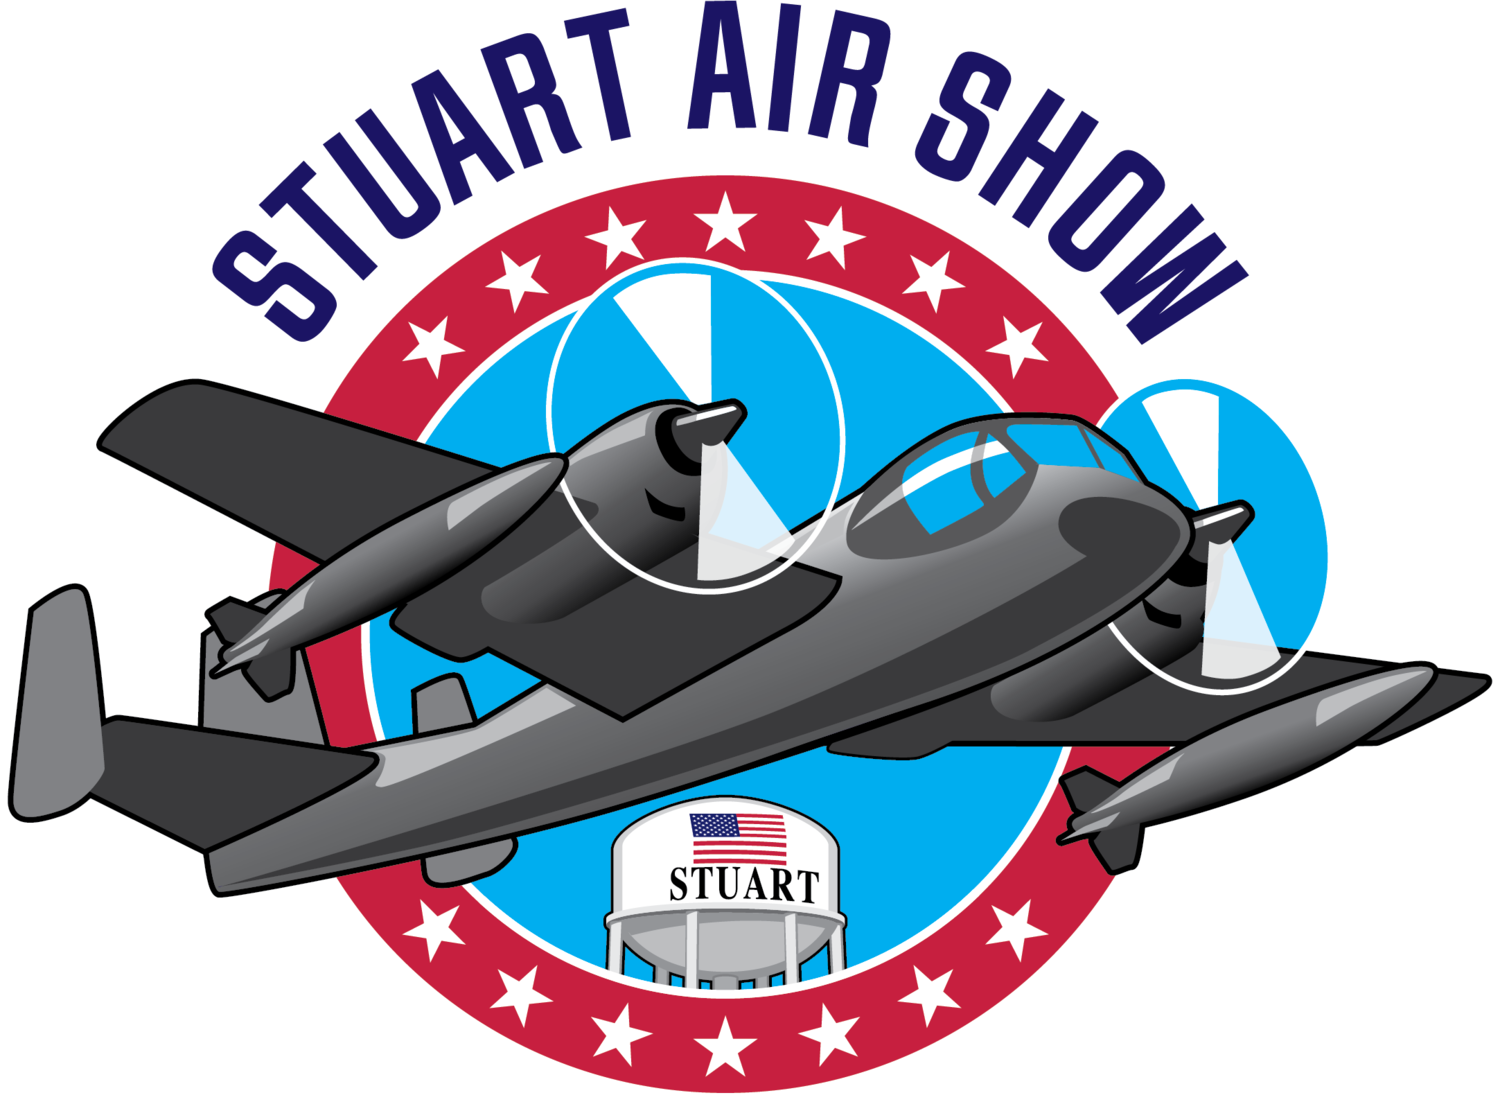 Stuart Air Show Trade Shows and Insights Market Prospects